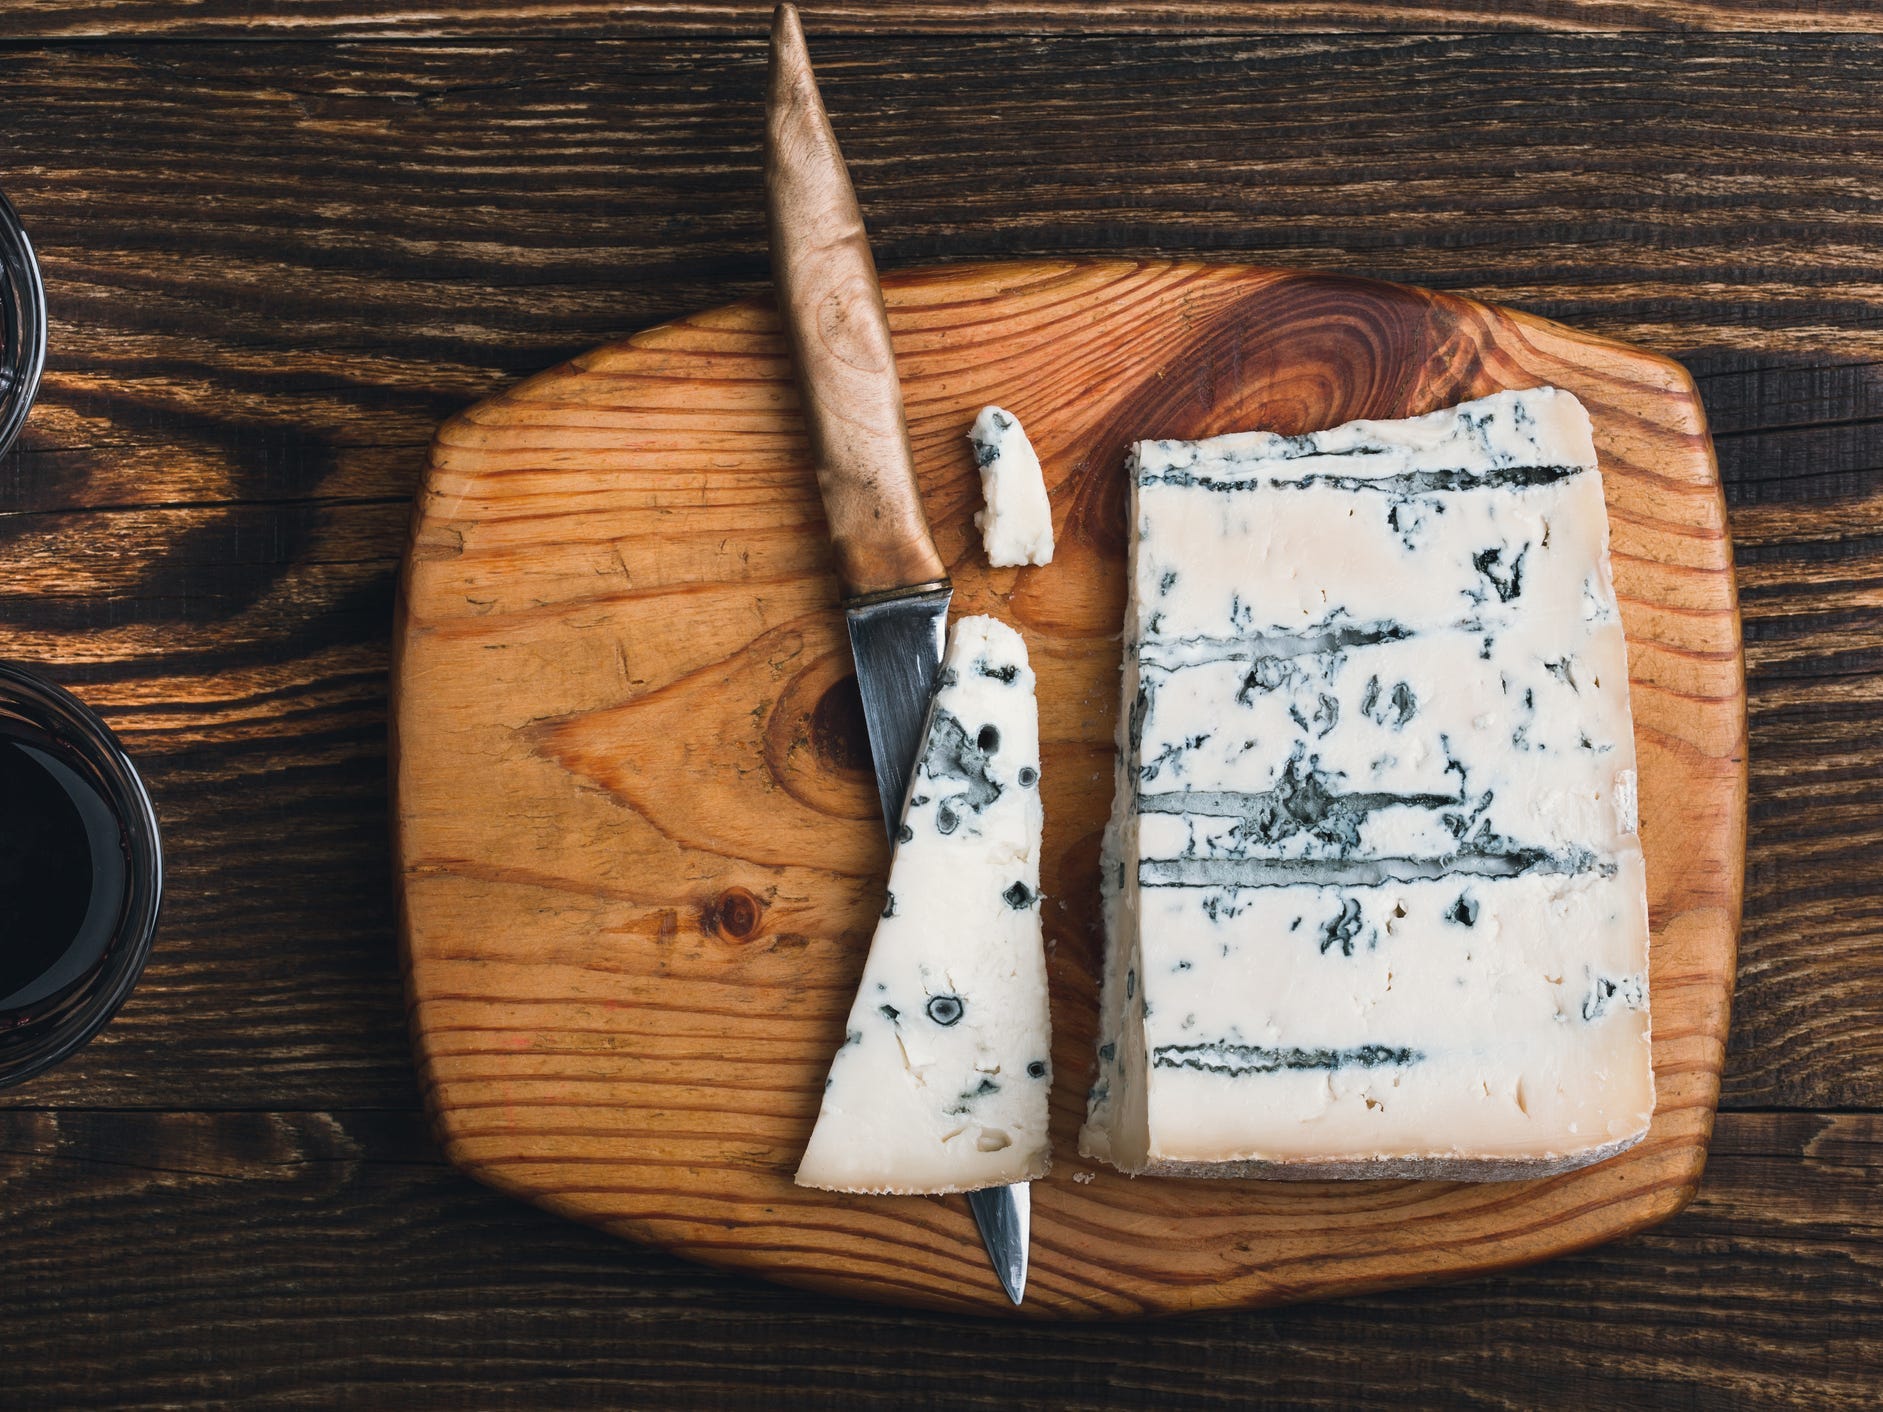 A wedge of blue cheese on a wooden cutting board with a knife and two glasses of wine